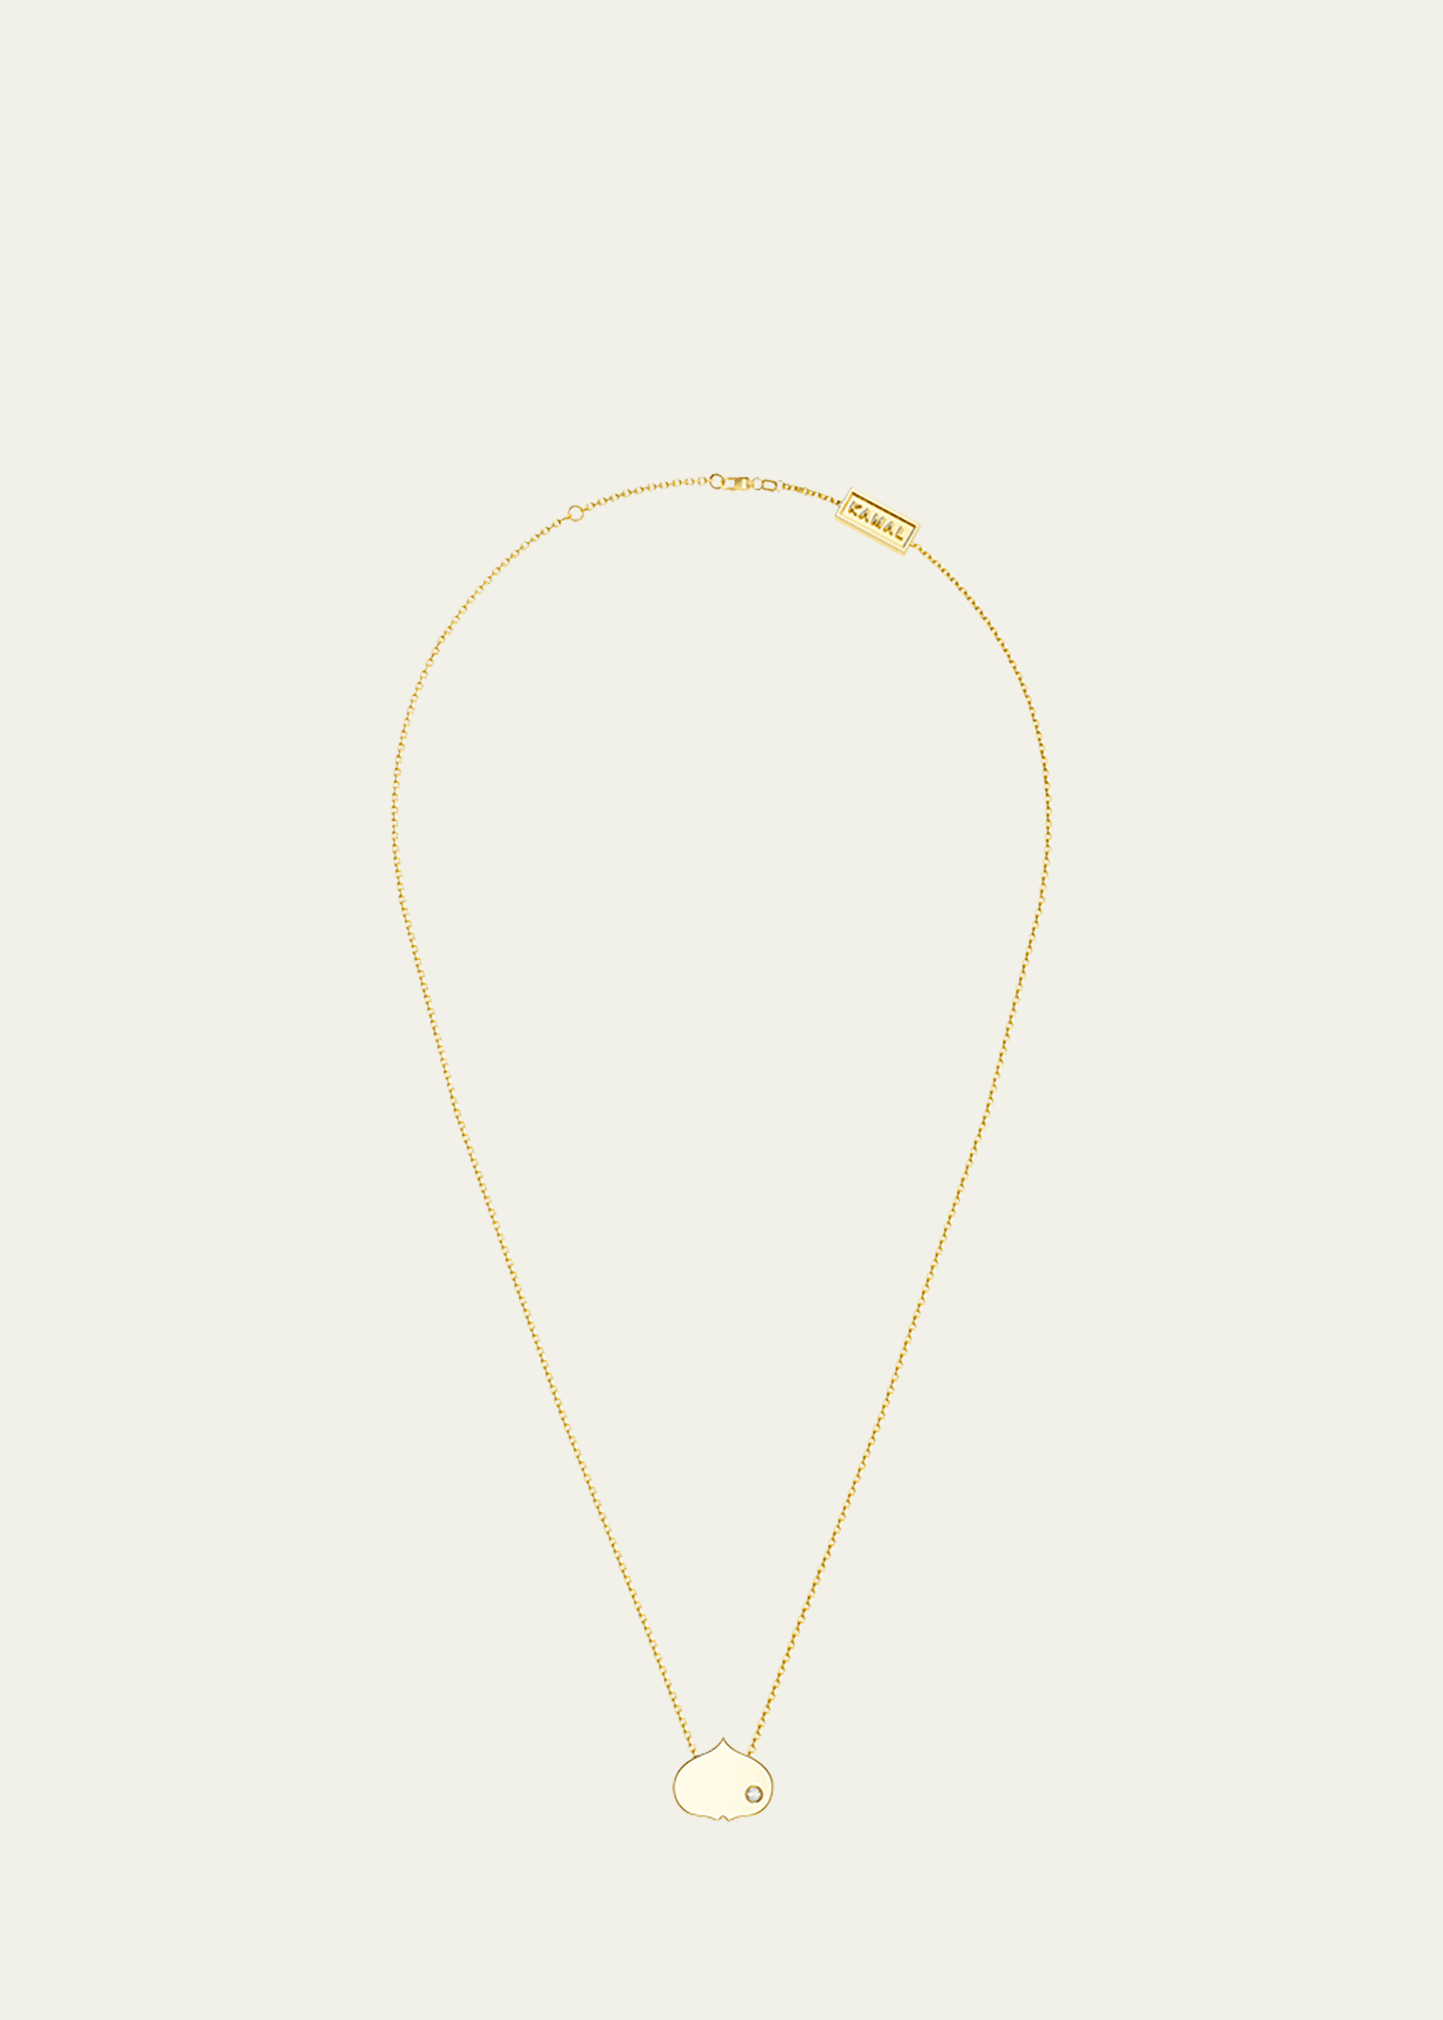 Kamal Eye Adore Midi Pendant Necklace, 11mm In Yellow Gold